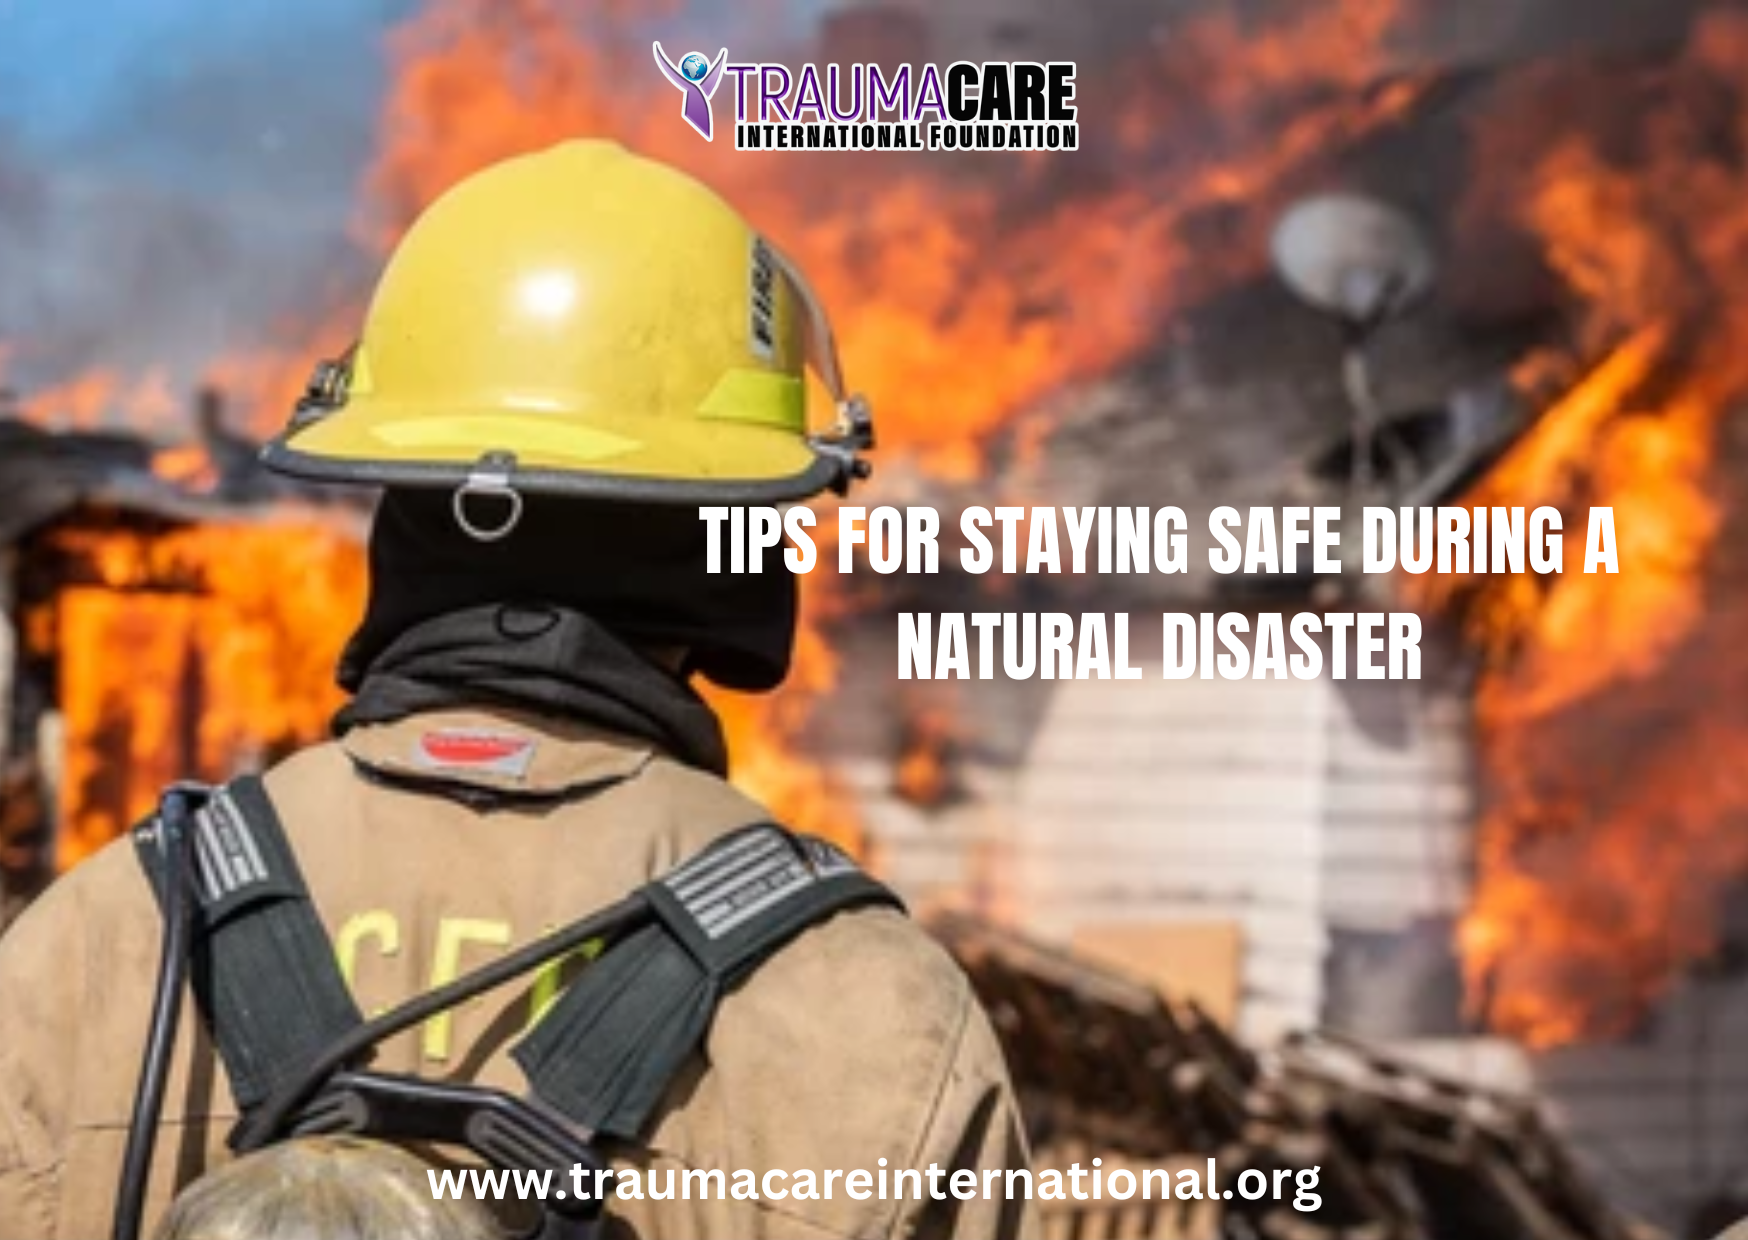 TIPS FOR STAYING SAFE DURING A NATURAL DISASTER